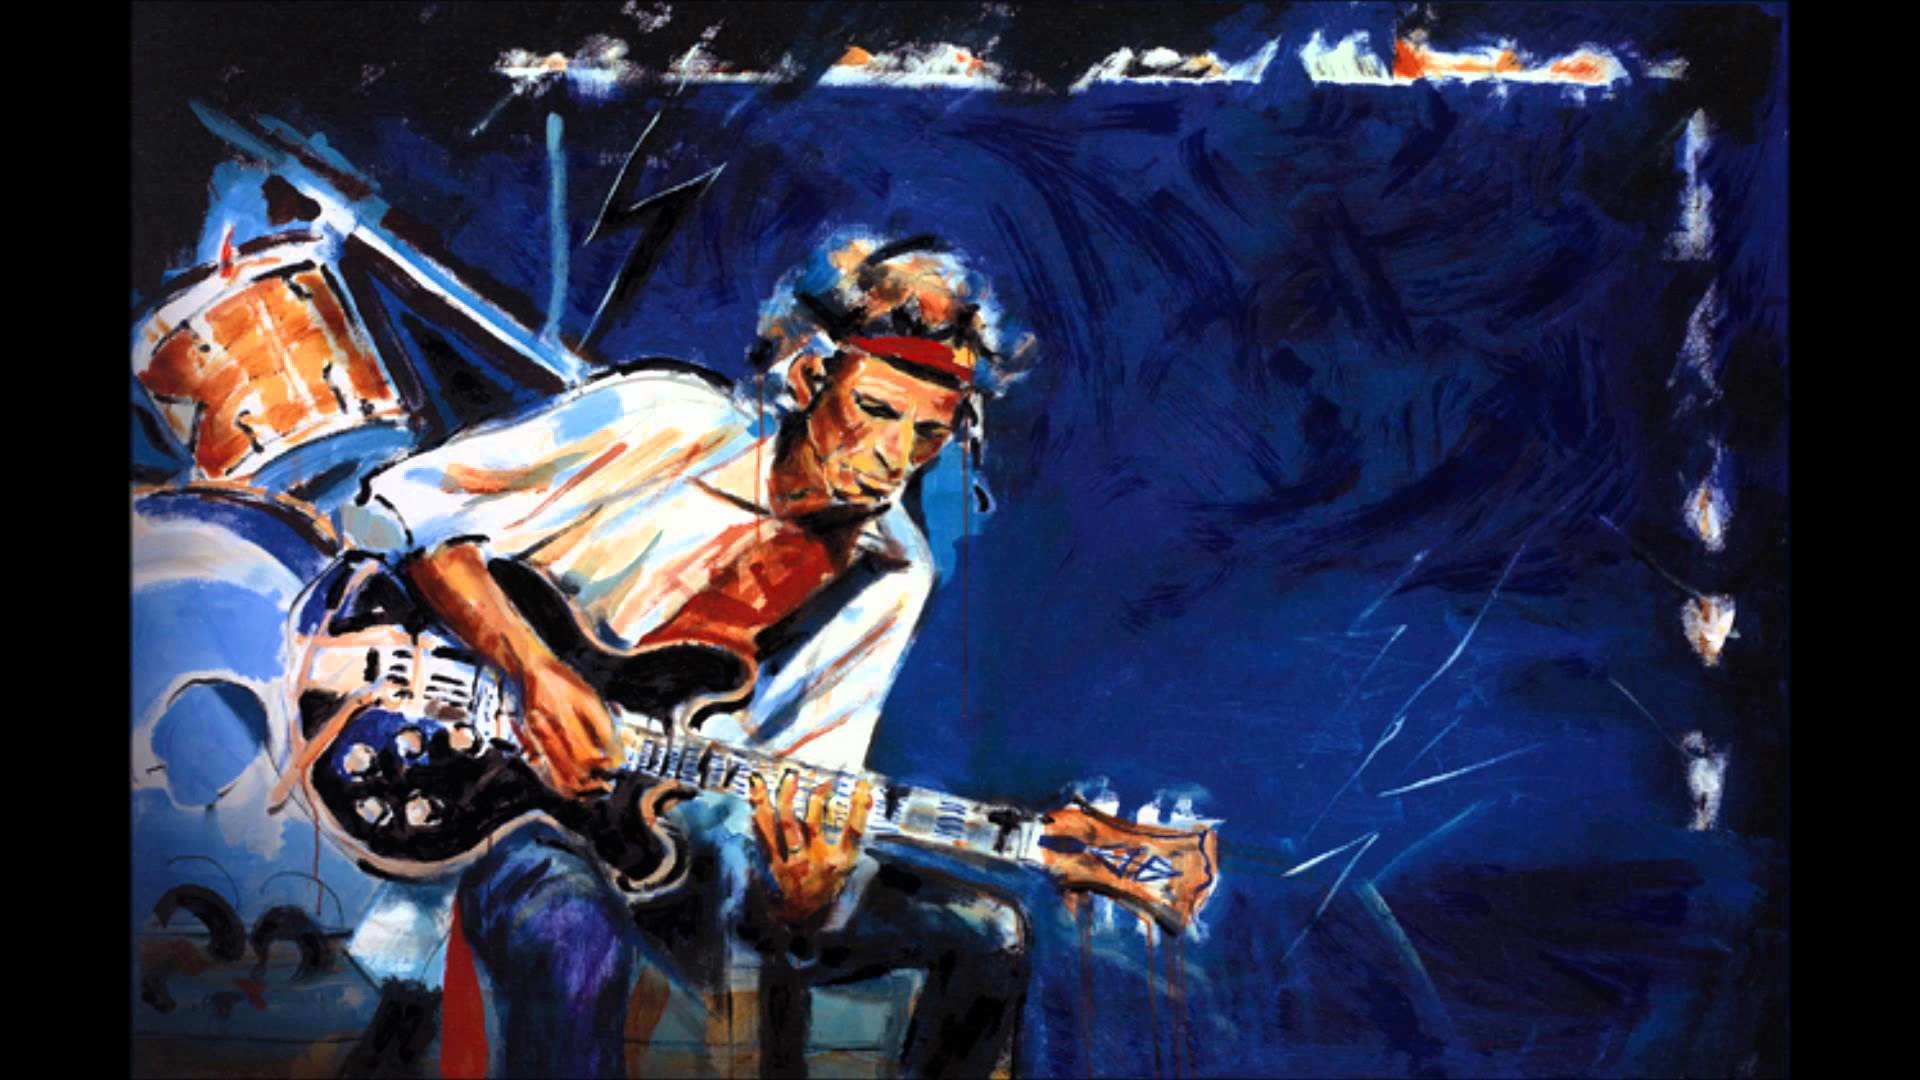 1920x1080 "Under My Thumb" Rolling Stones Keith Richards Instrumental cover - YouTube